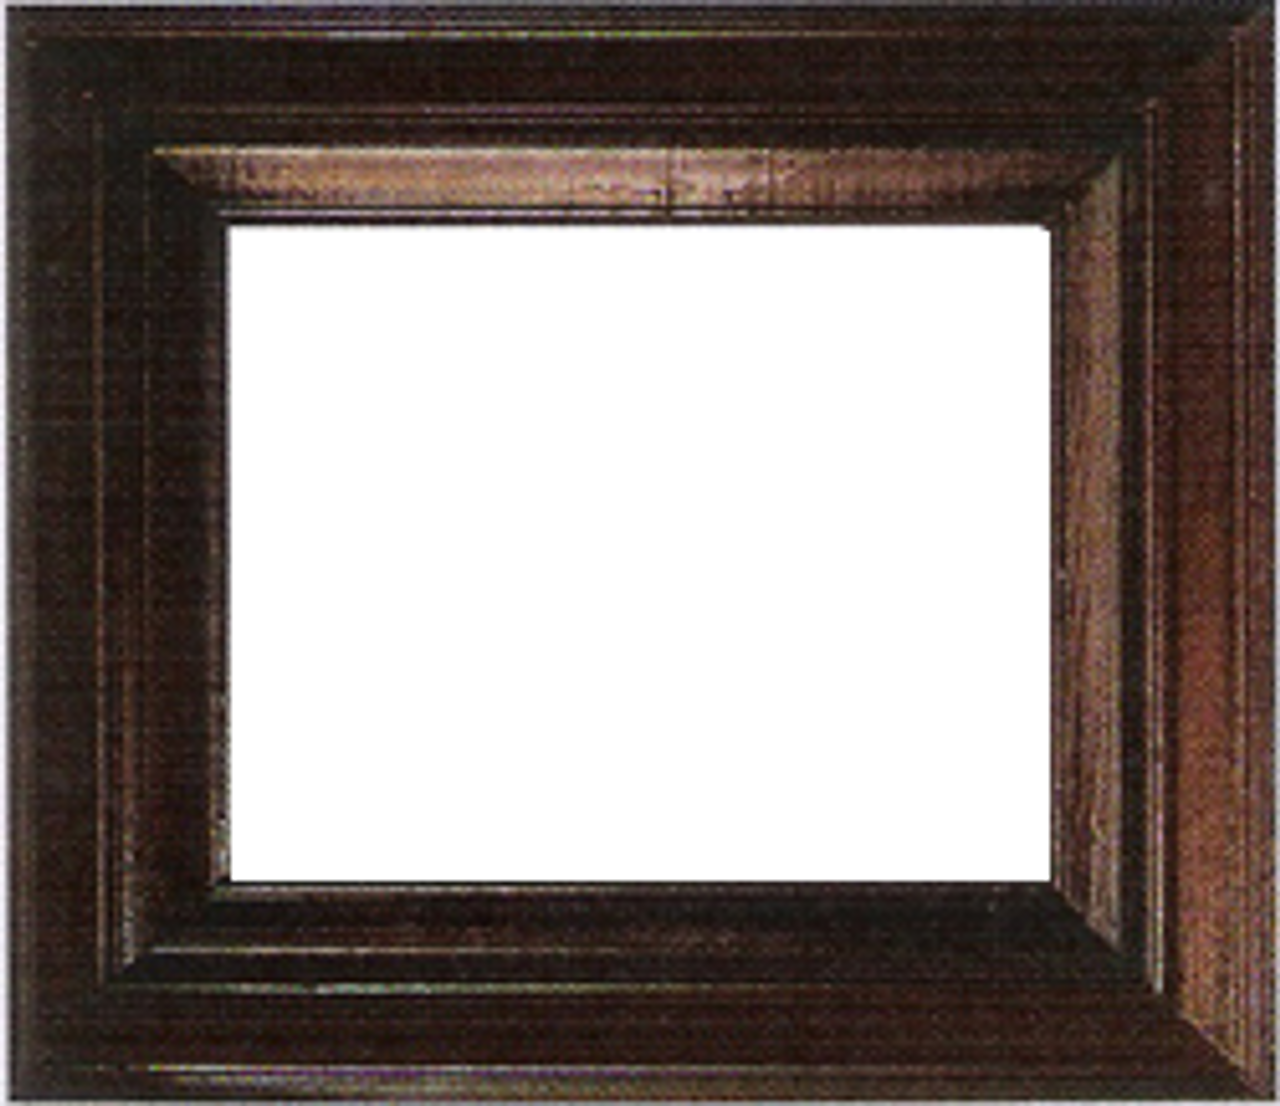 3 Inch Econo Wood Frames With Wood Liners: 16X20*